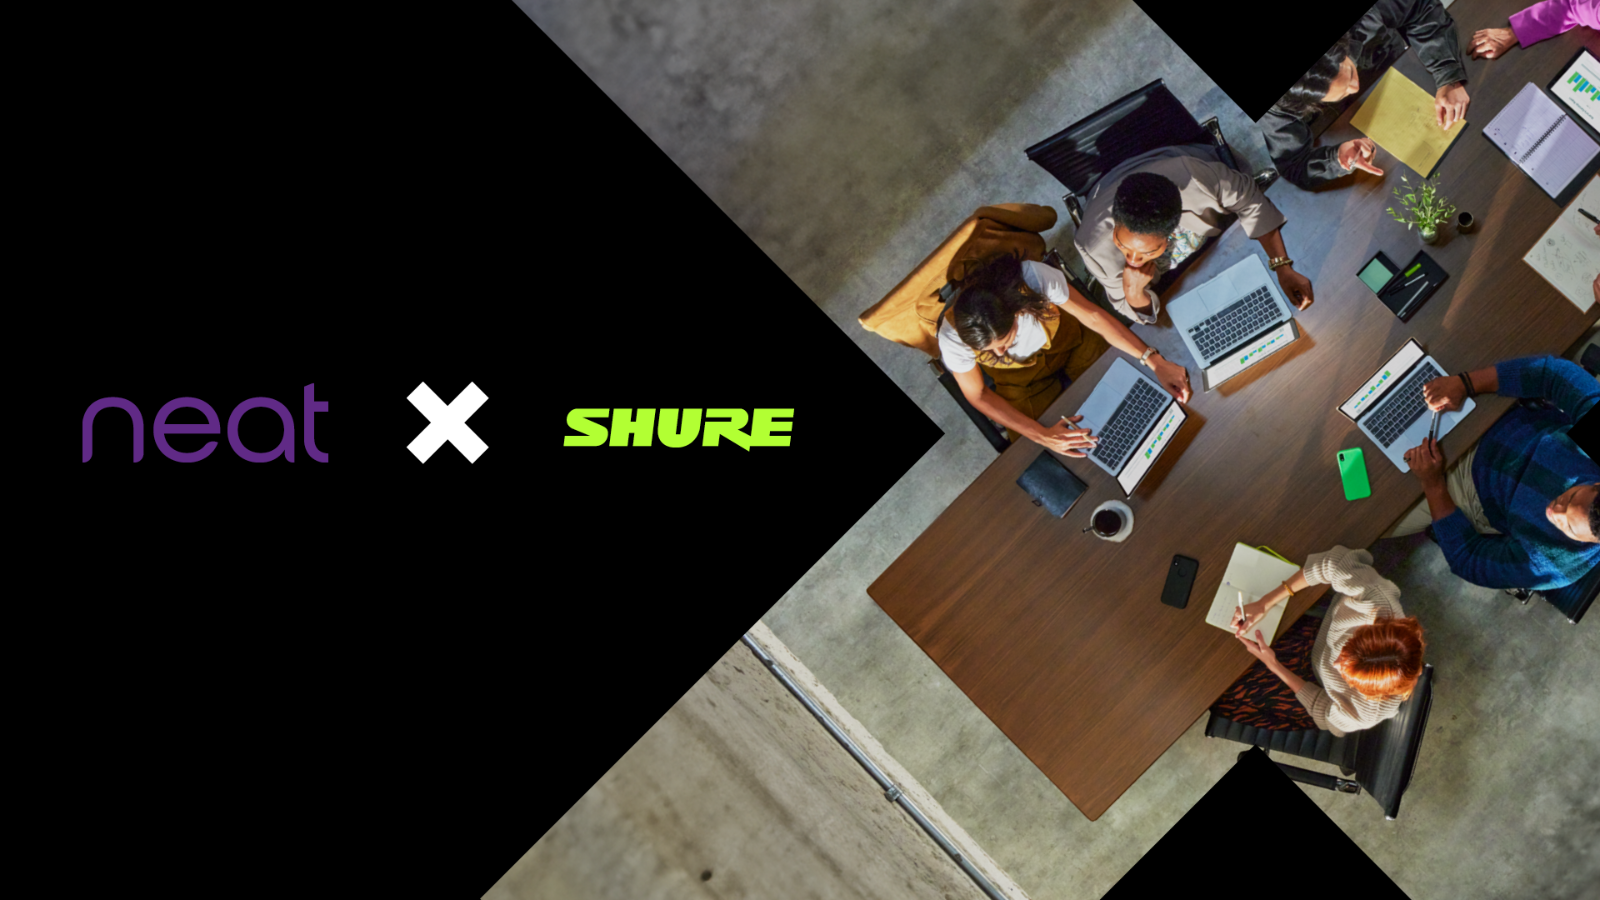 Shure and Neat Transform the Meeting Experience for Complex Spaces - News